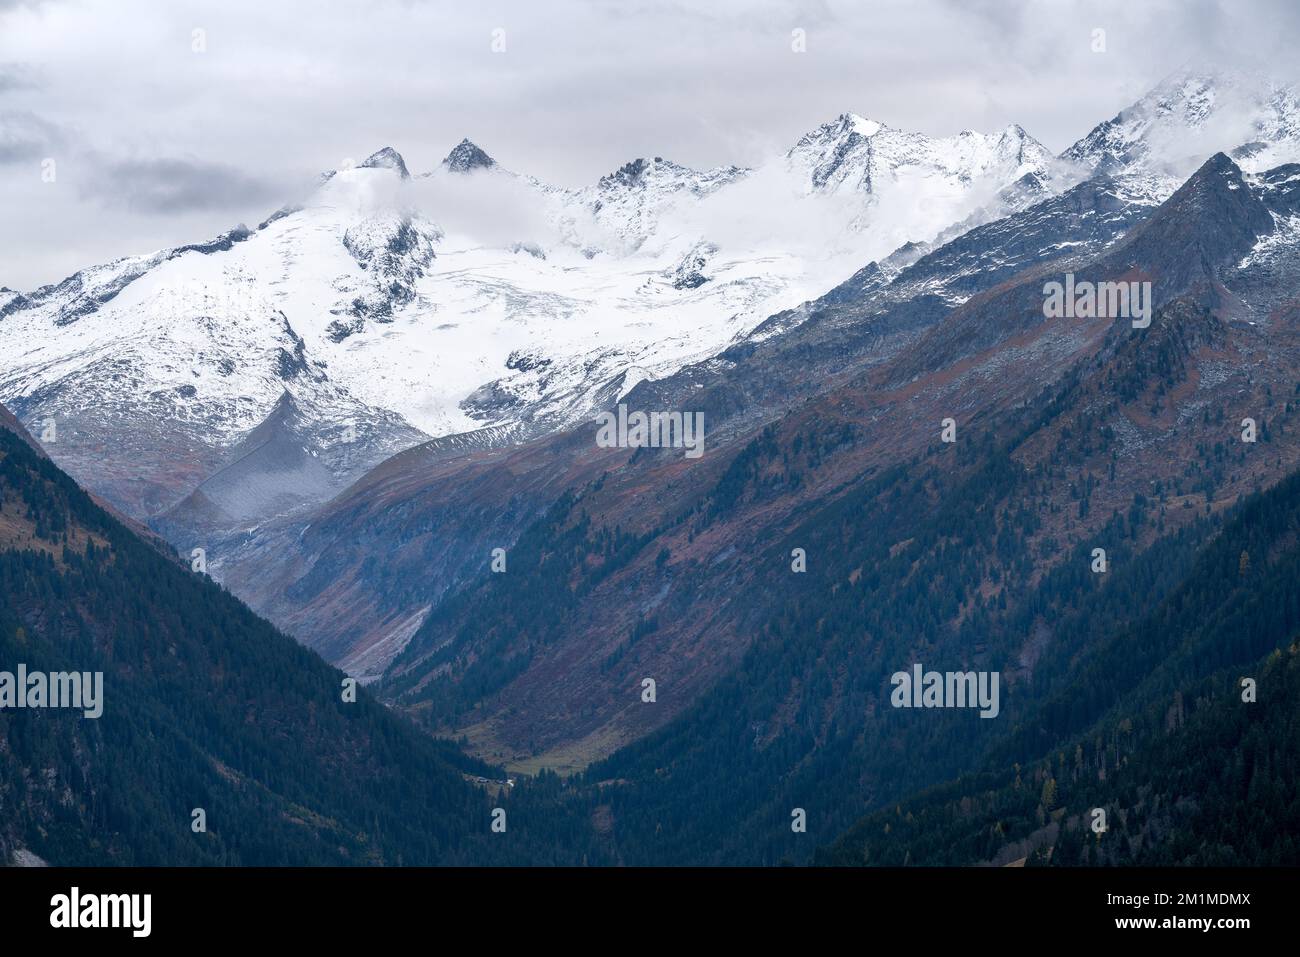 Gabler, Reichenspitze and Hahnenkamm peaks covered in snow and ice on a cloudy, rainy day of autumn. Majestic alpine peaks in the mist above Gerlos Stock Photo